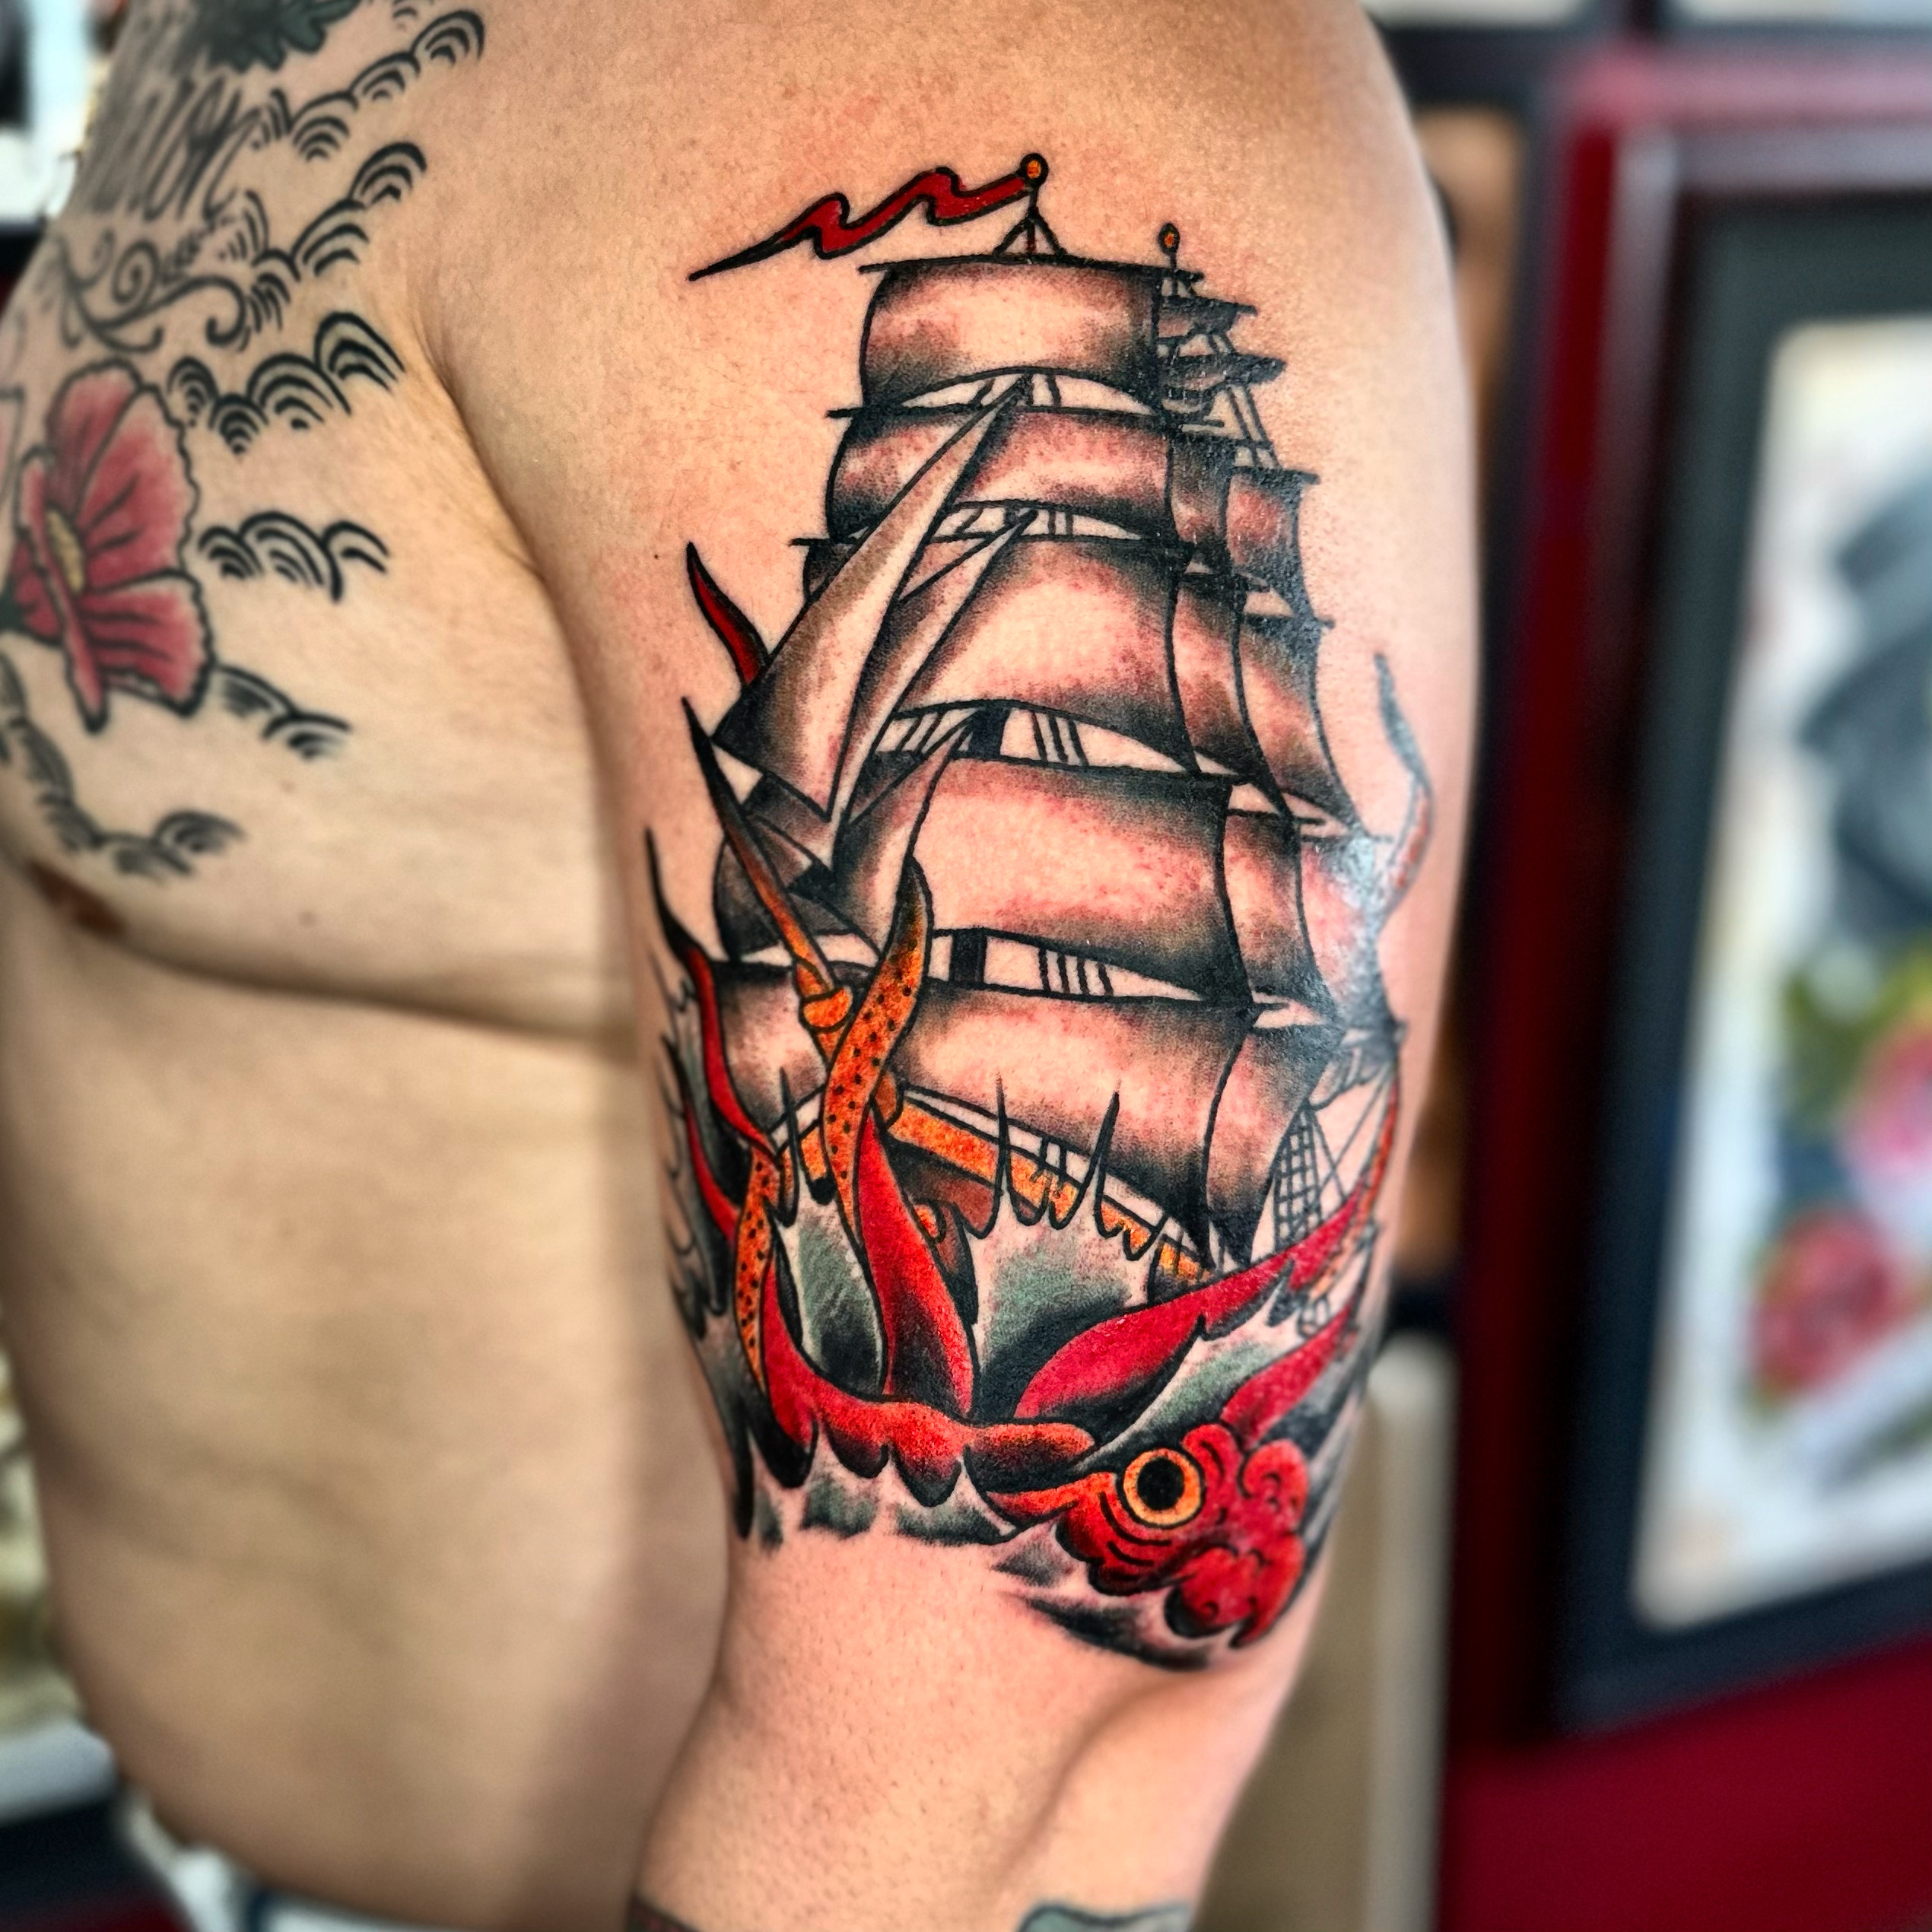 Tattoo of a ship and a squid from top Dallas tattoo shop